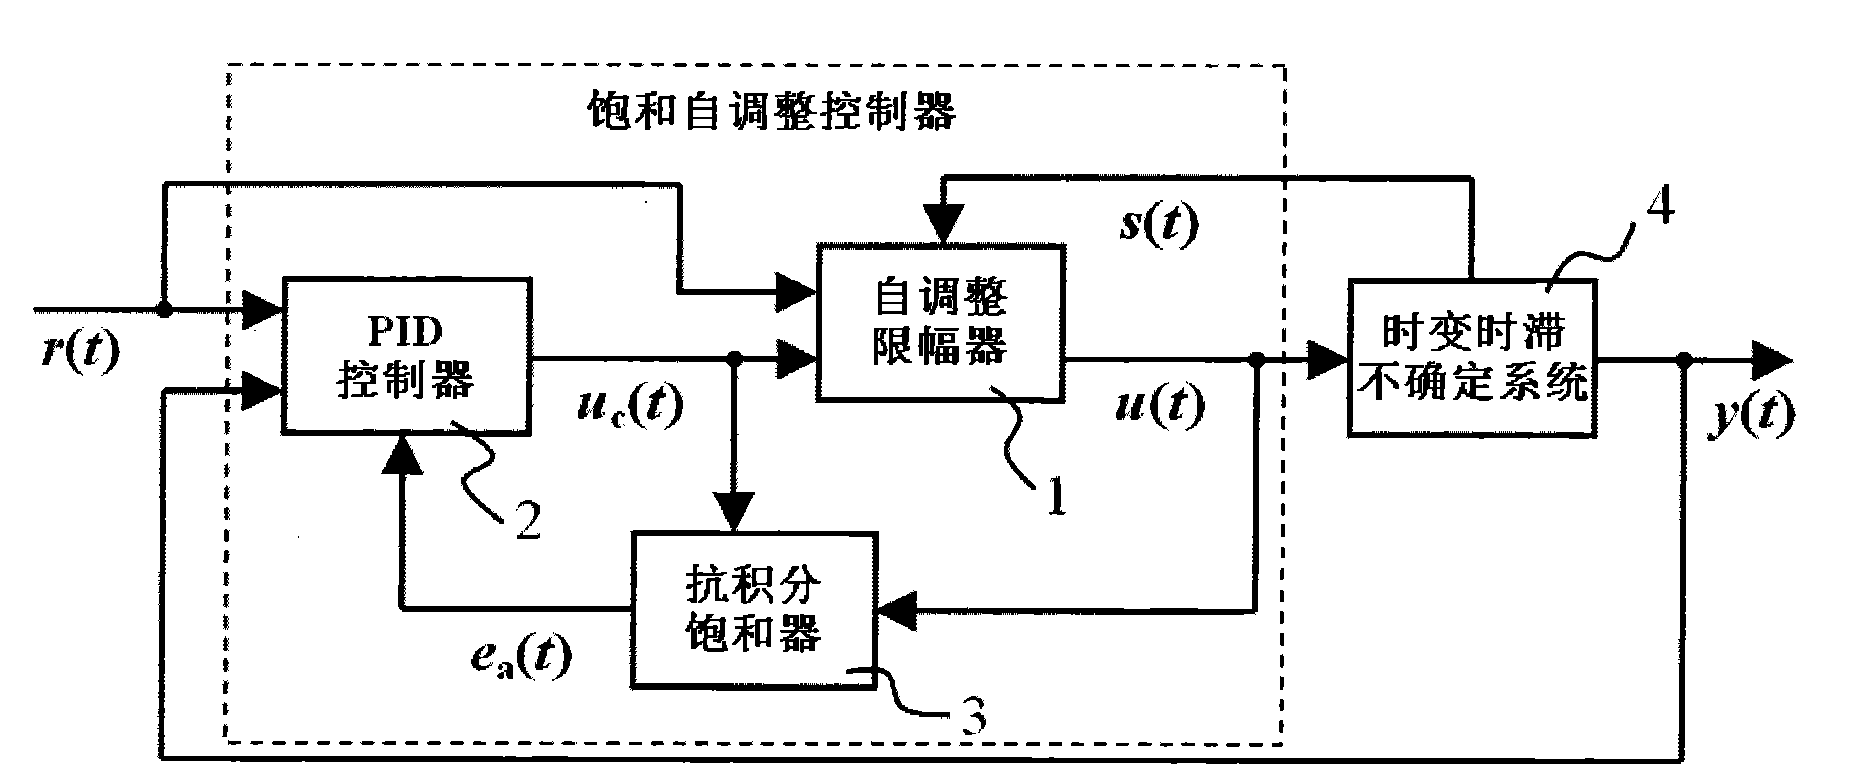 Saturated self-adjusting controller for time-varying delay uncertain system